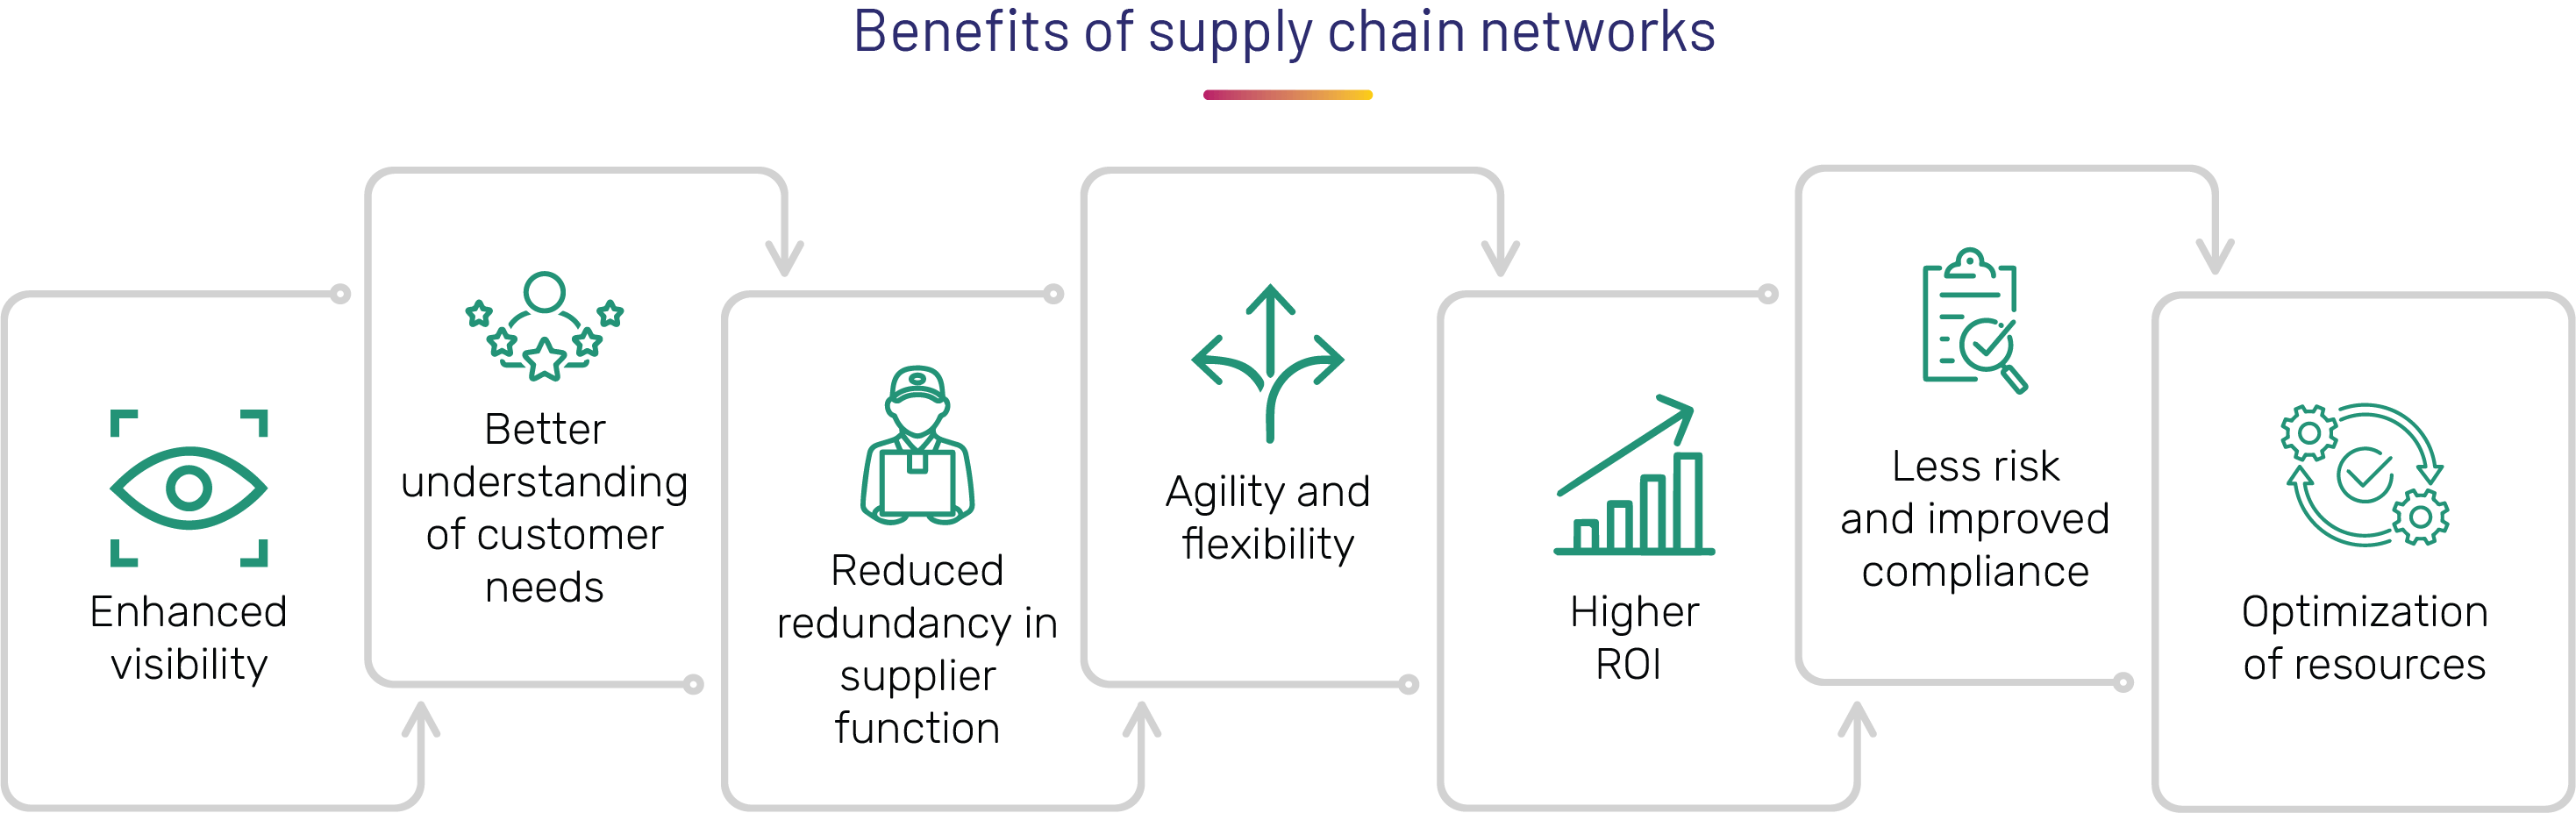 Benefit of supply chain networks